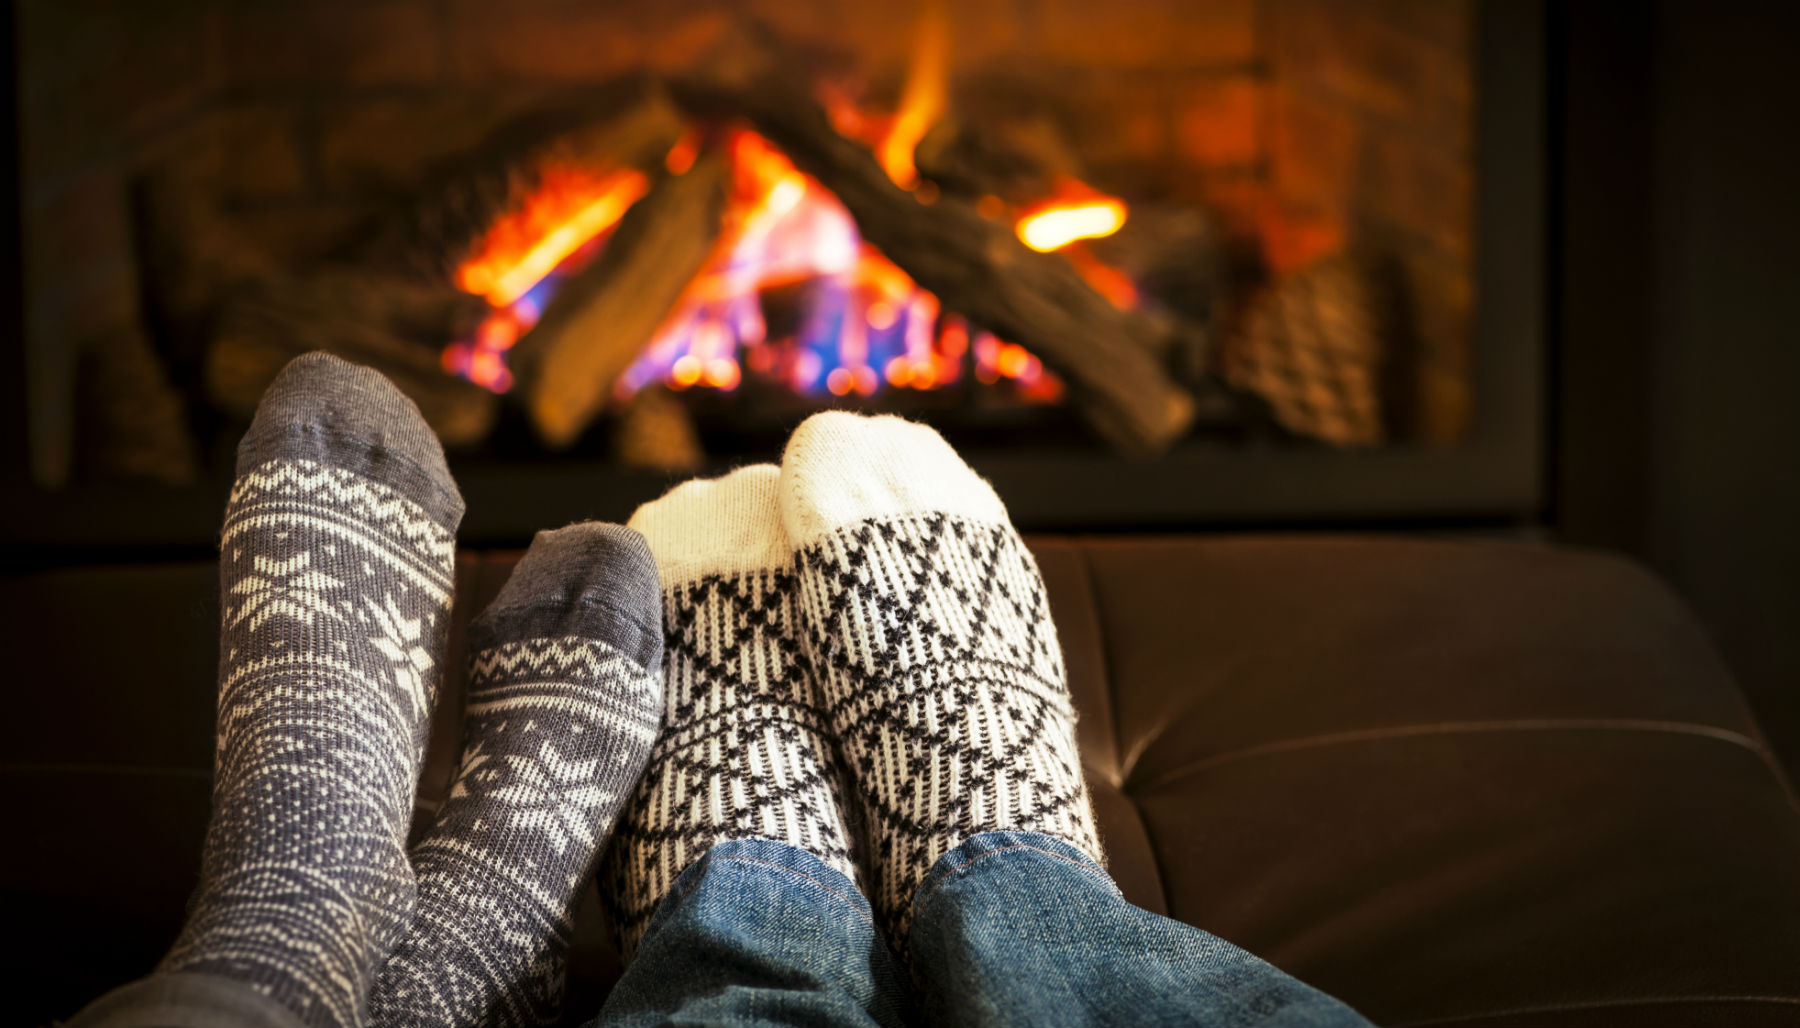 Get Through the Winter With These Fun At-Home Activities